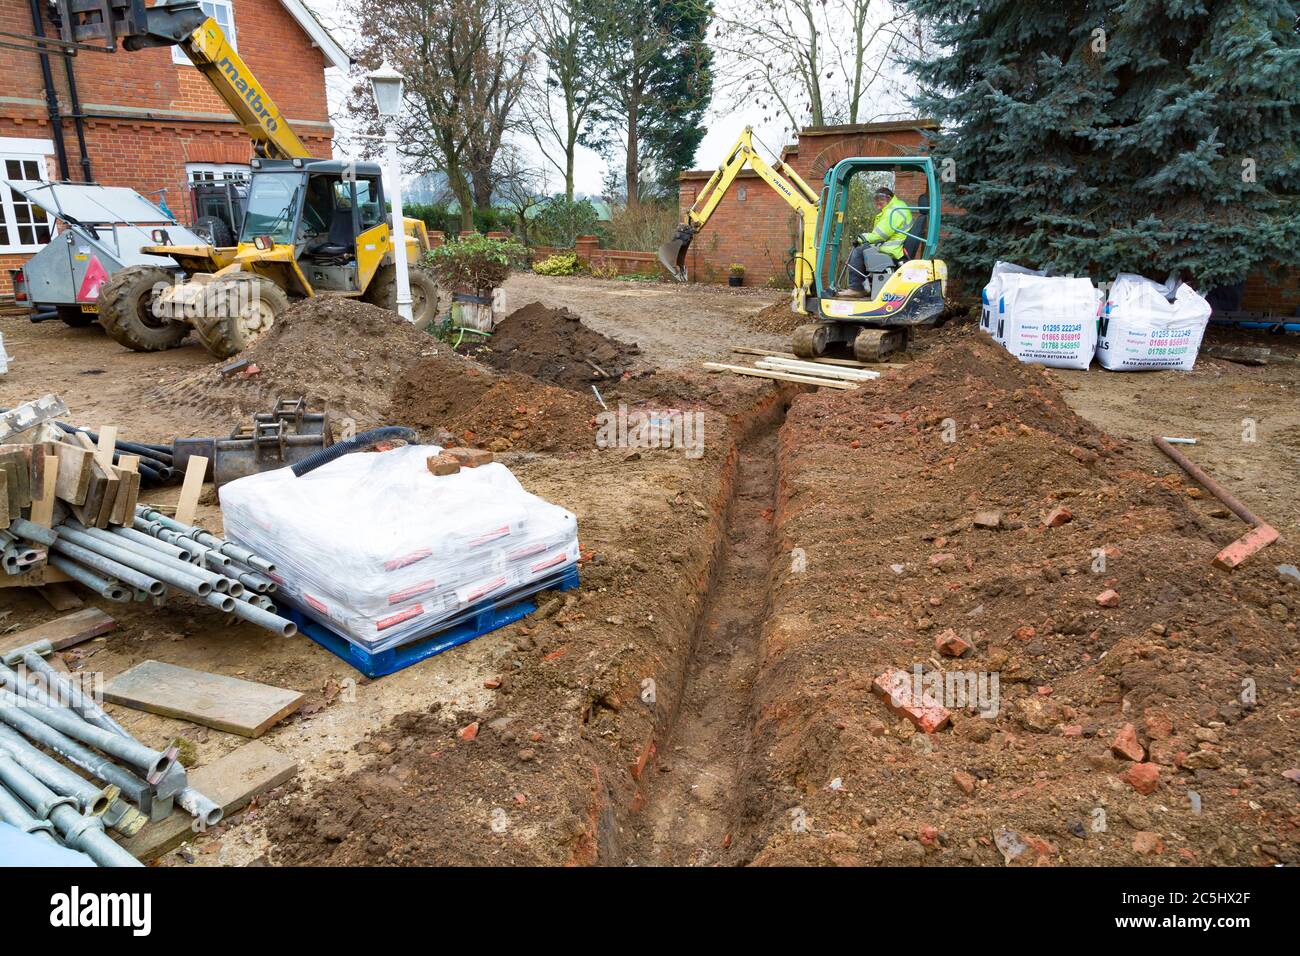 BUCKINGHAM, UK - December 02, 2016. Digger driver, digging a trench for drains on a UK building site Stock Photo